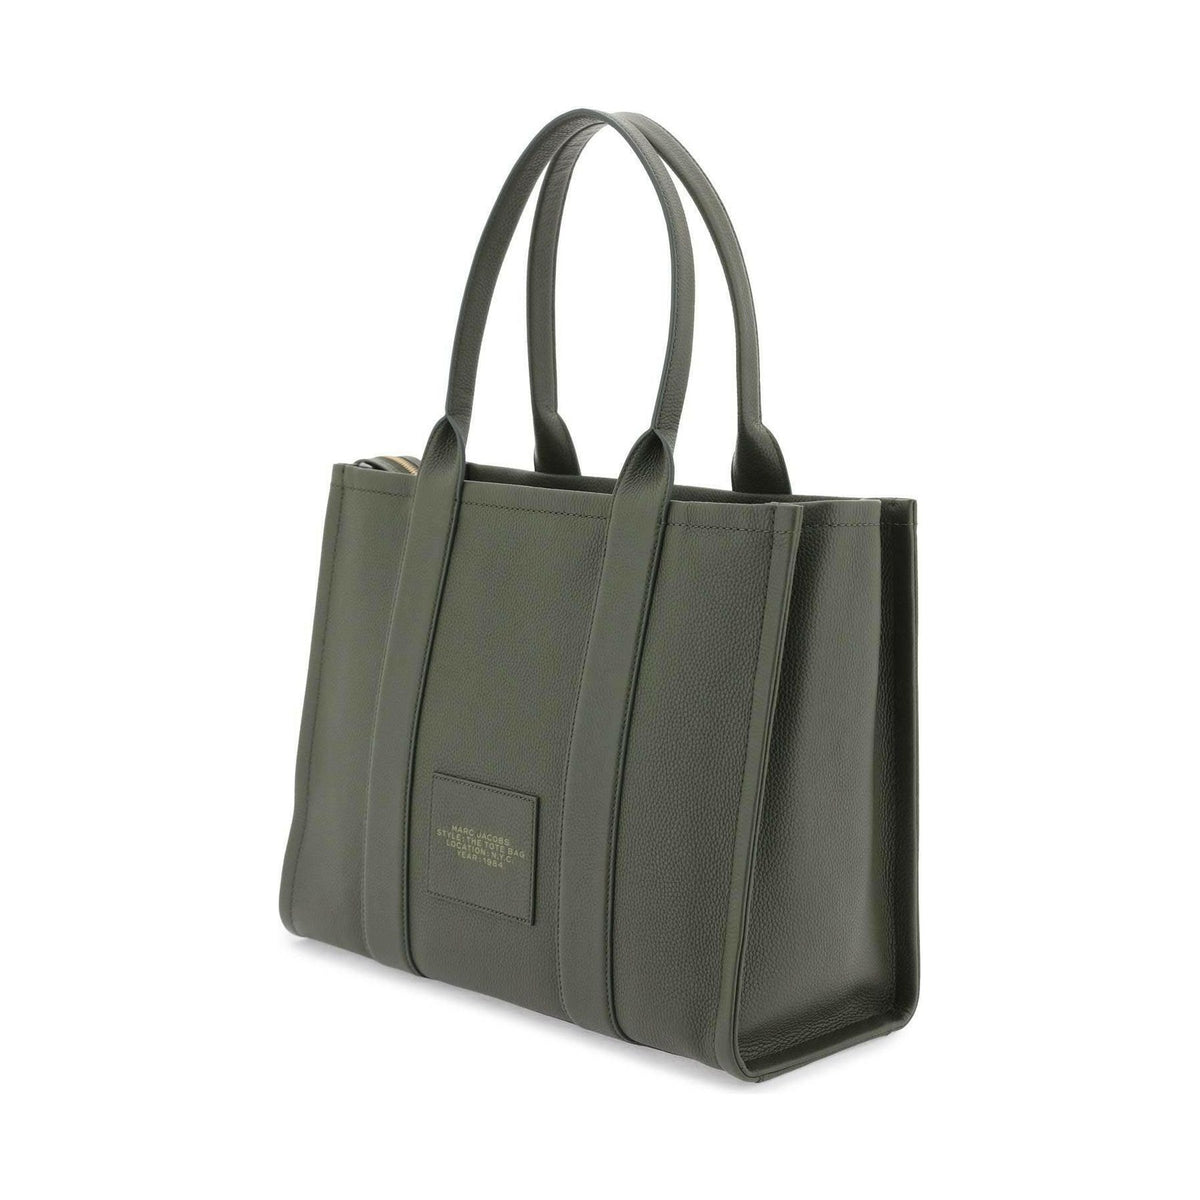 MARC JACOBS - Forest The Leather Large Tote Bag - JOHN JULIA